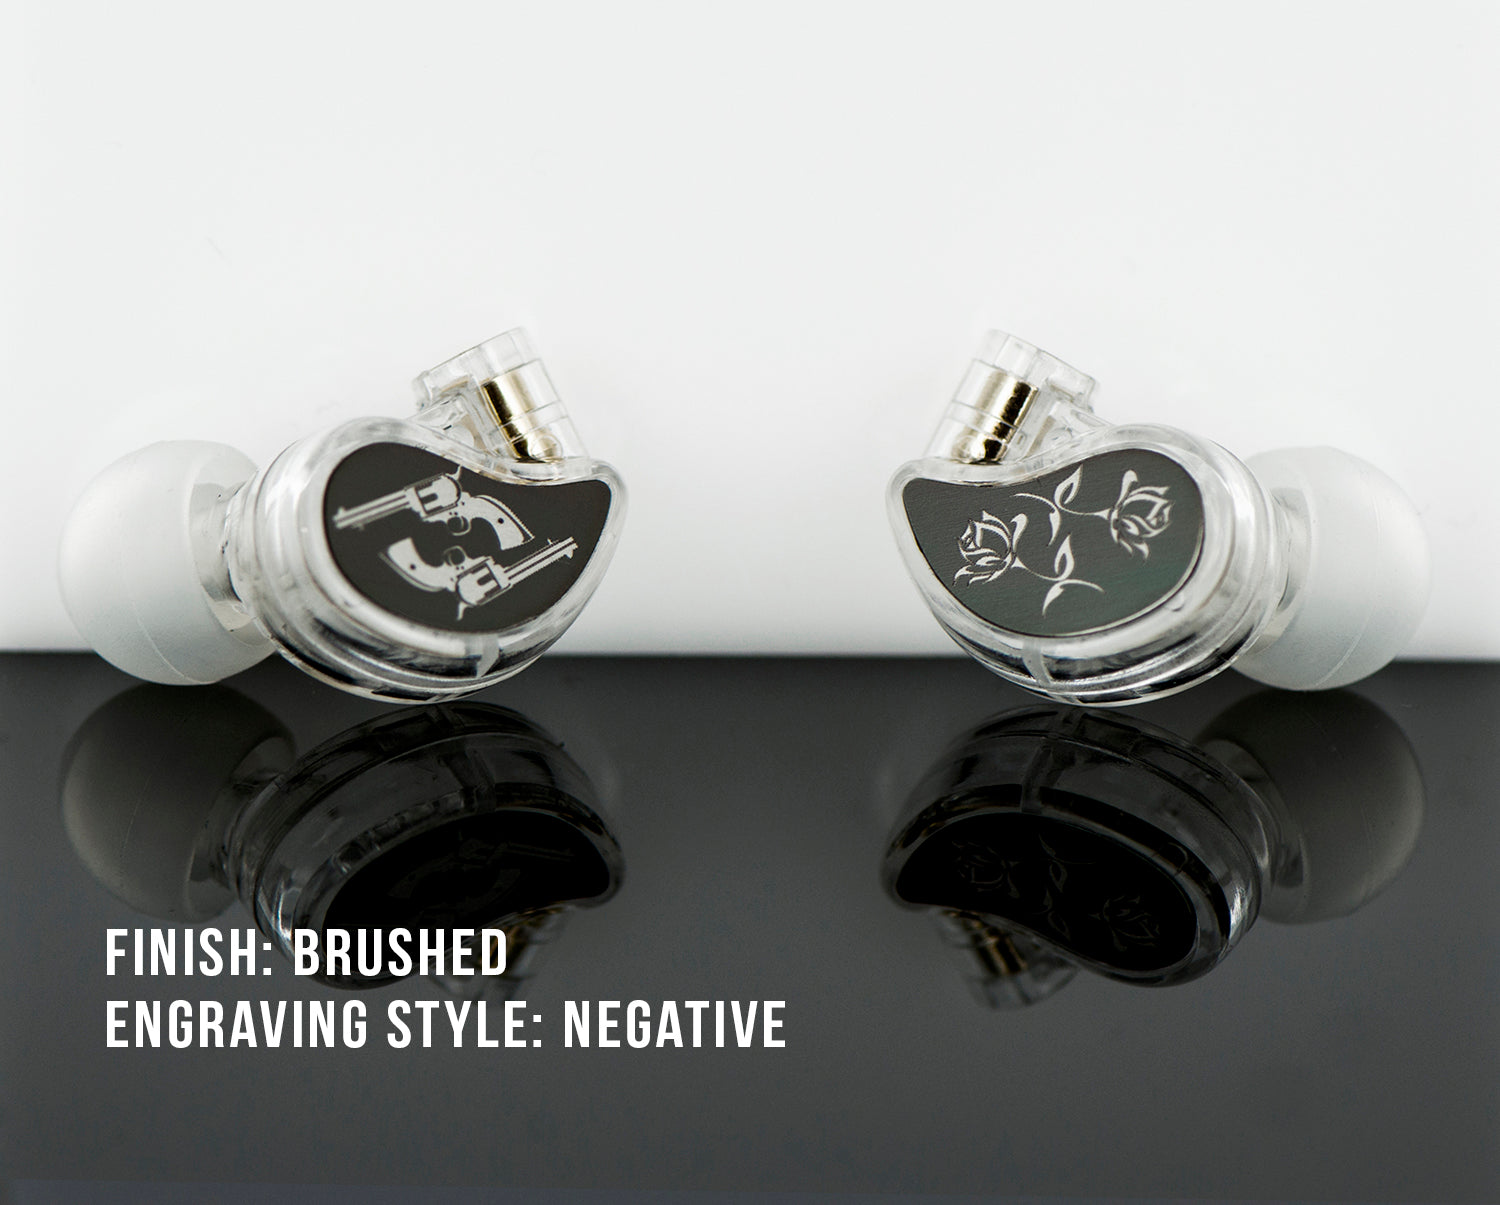 Two custom-engraved, clear in-ear monitors with brushed finish, displaying musical note and rose designs, reflected on a glossy black surface. text indicates "finish: brushed, engraving style: negative.